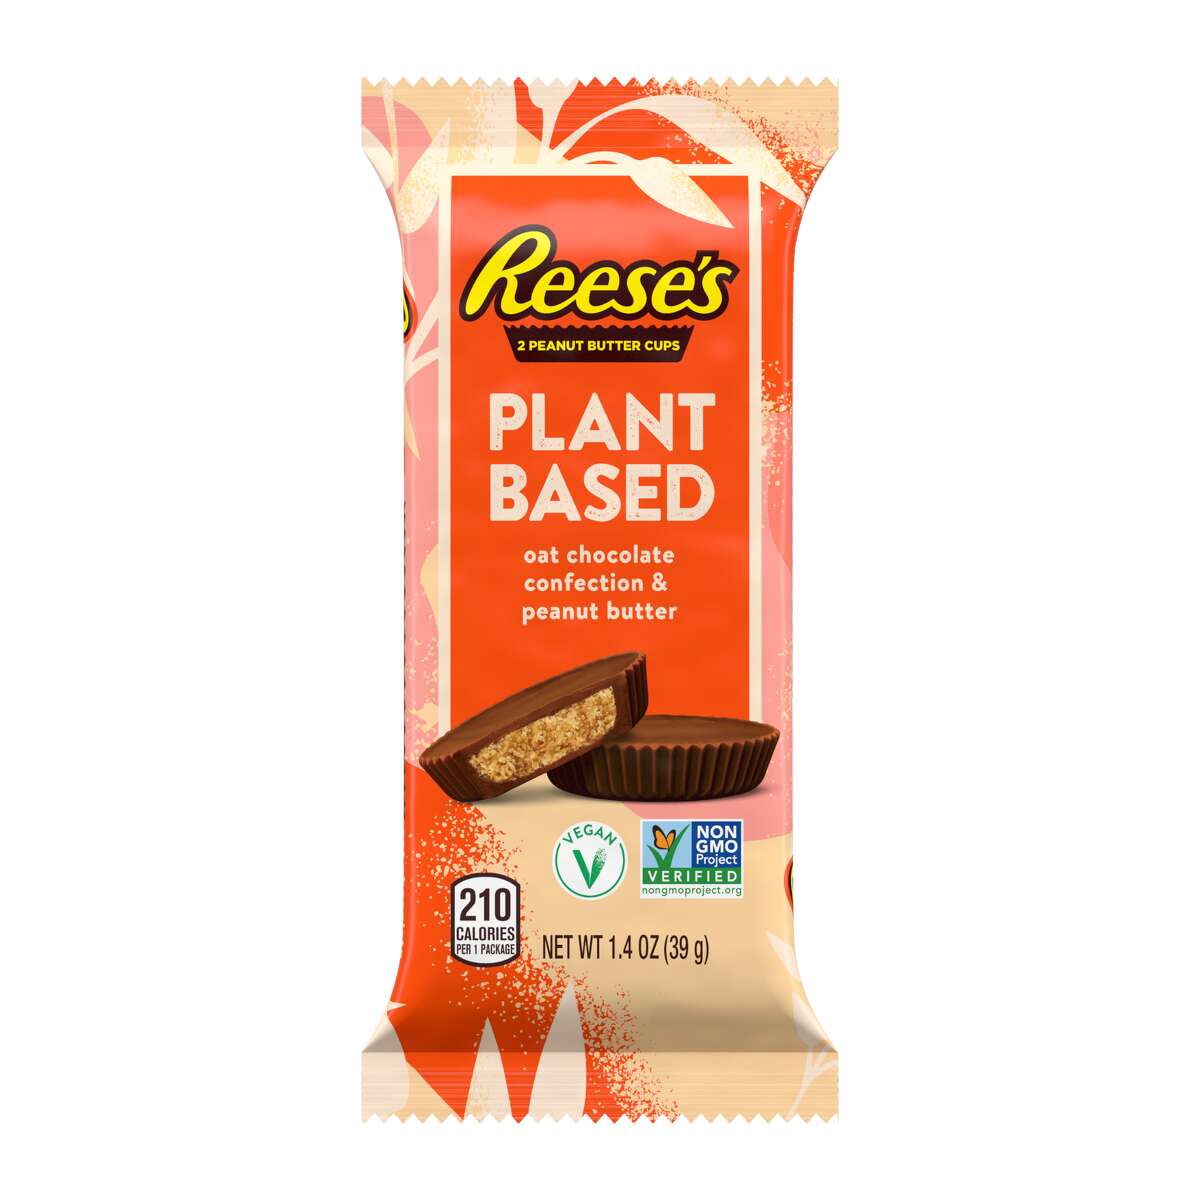 Plant-based Reese's peanut butter cups will be available later in March.